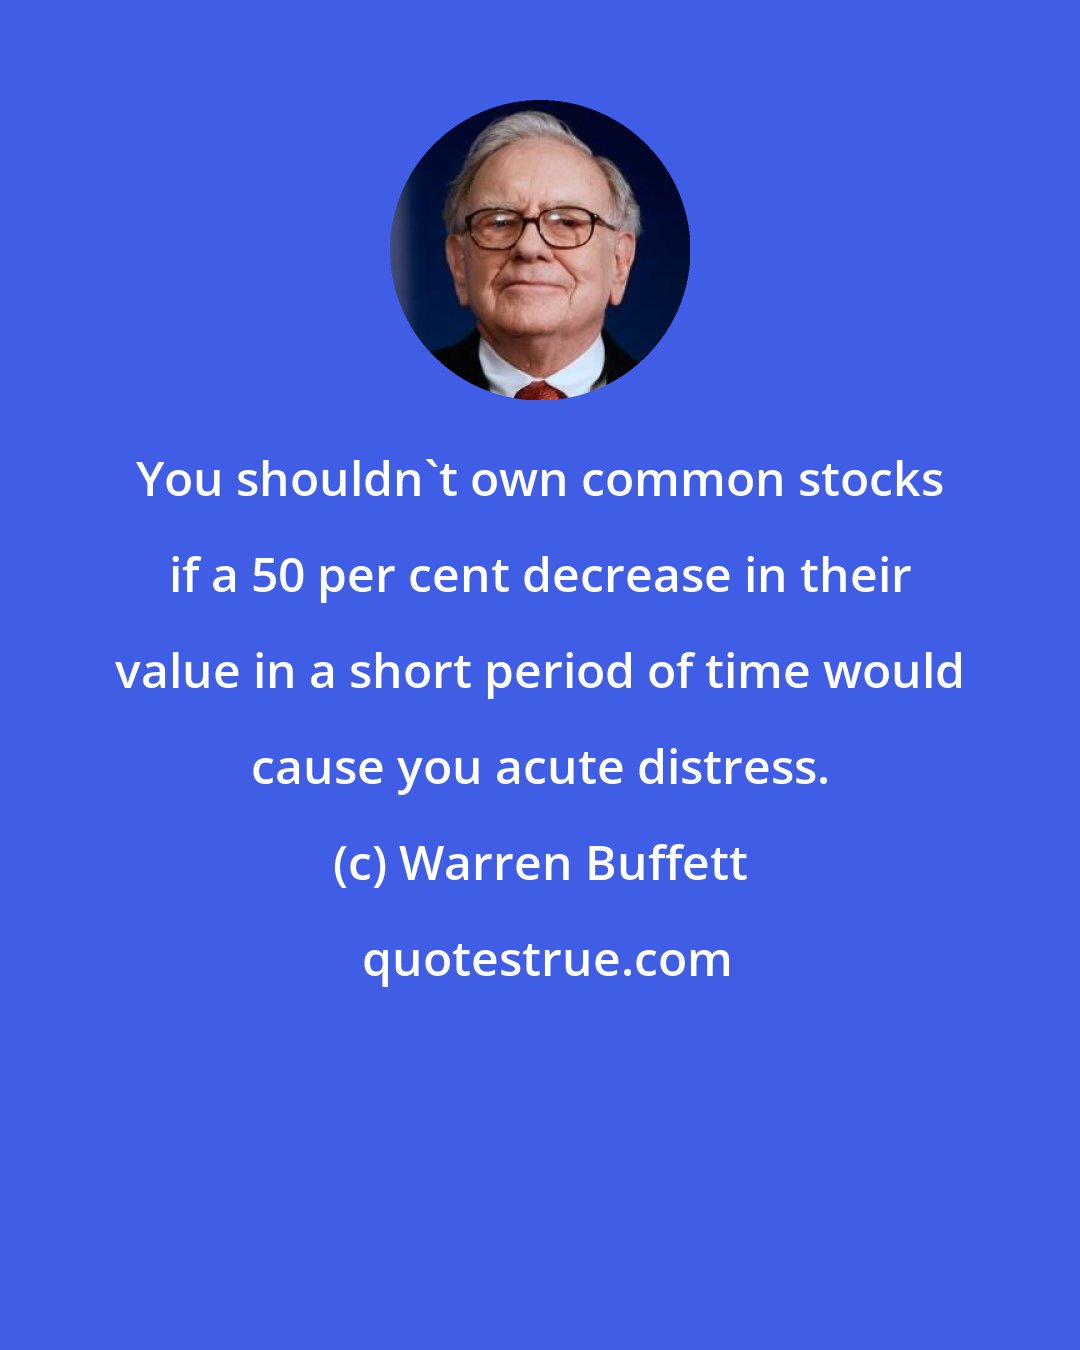 Warren Buffett: You shouldn't own common stocks if a 50 per cent decrease in their value in a short period of time would cause you acute distress.